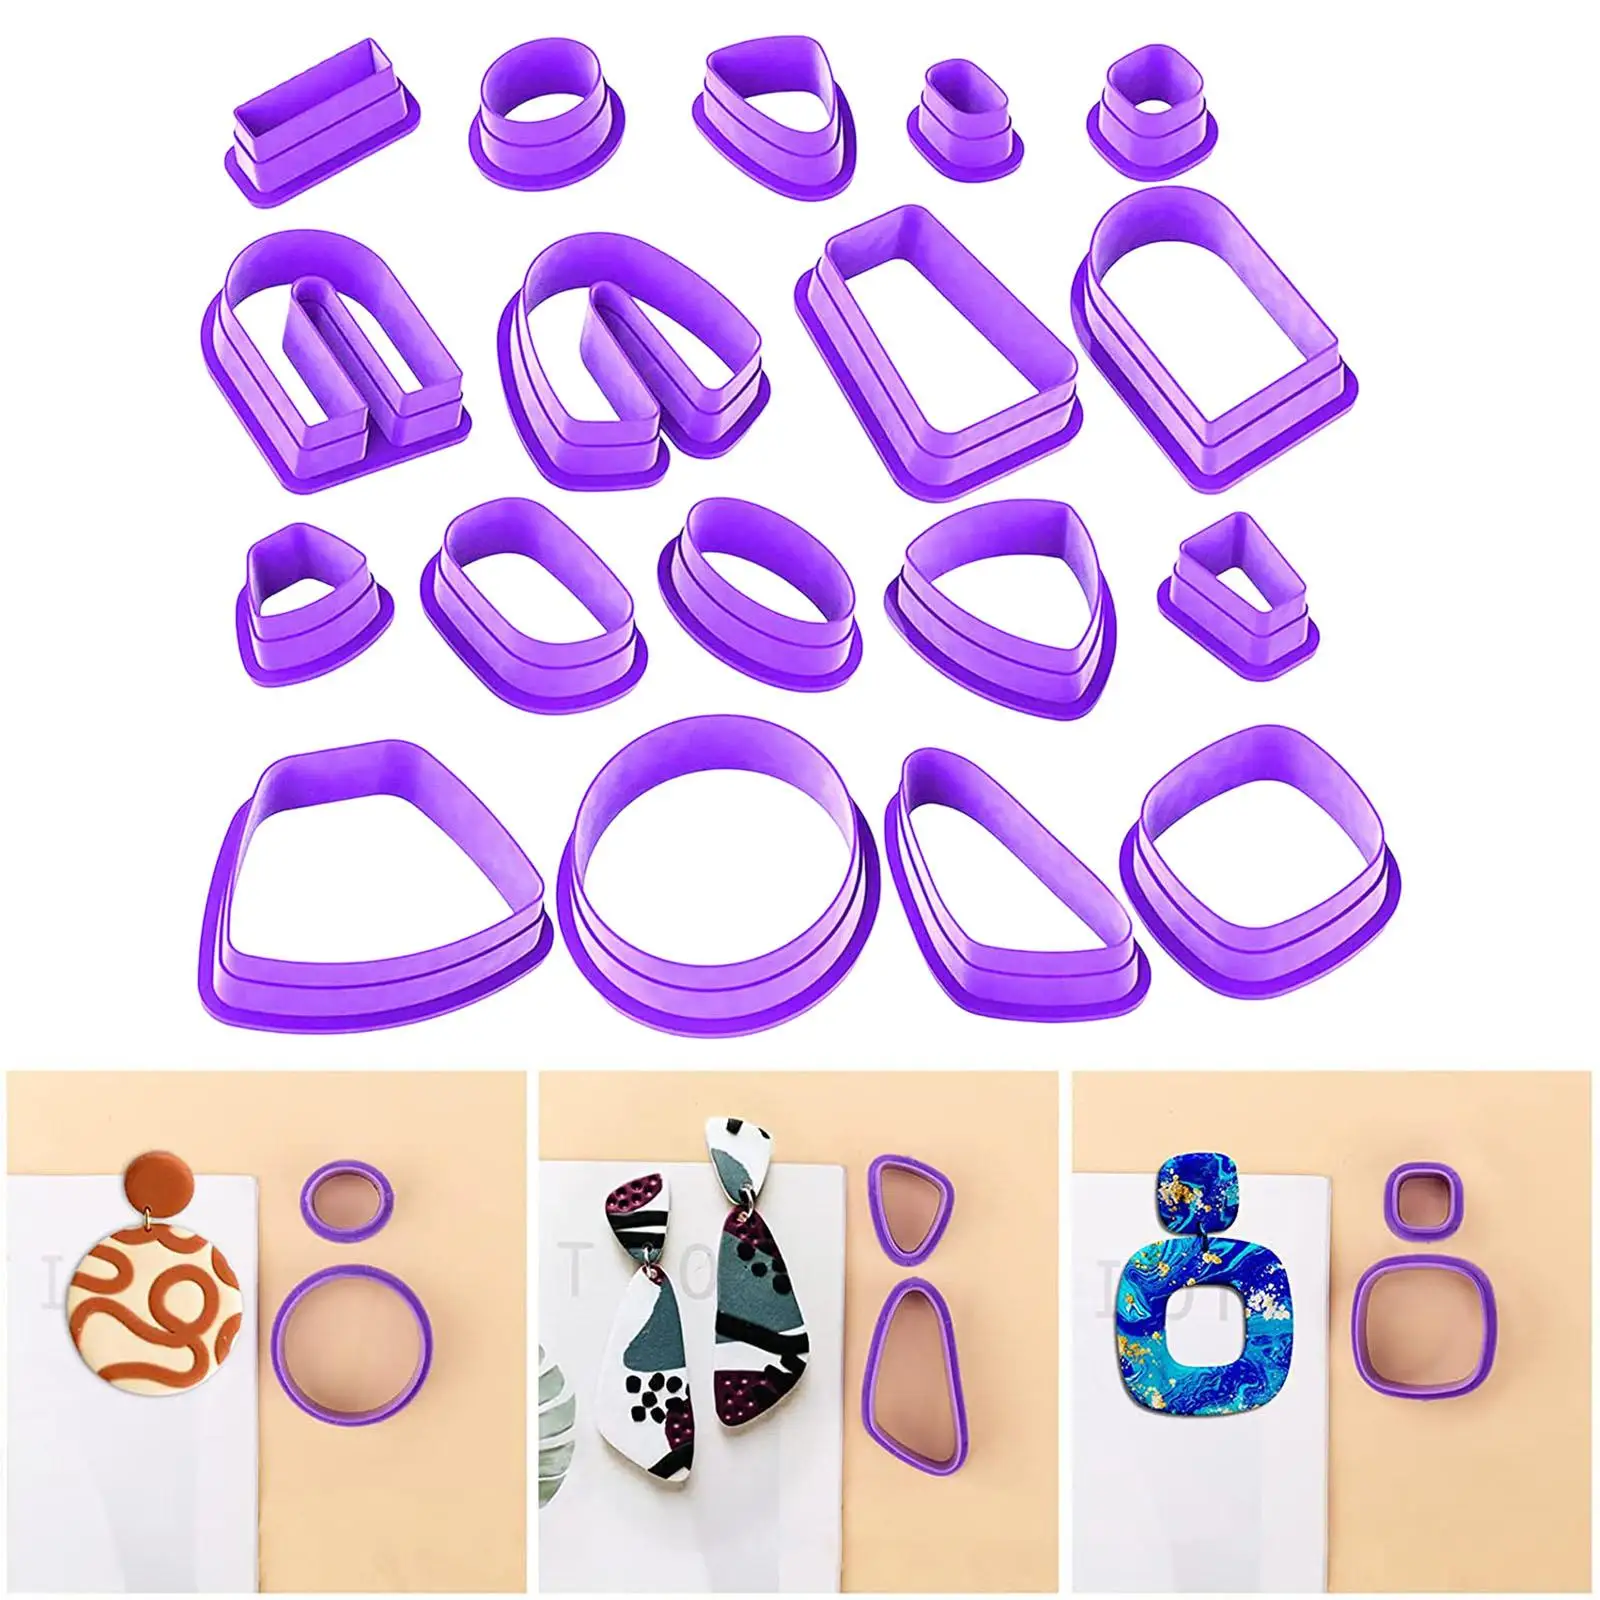 18x Plastic Polymer Clay Cutters Earring Making Kit Different Shapes Jewelry Making Molds